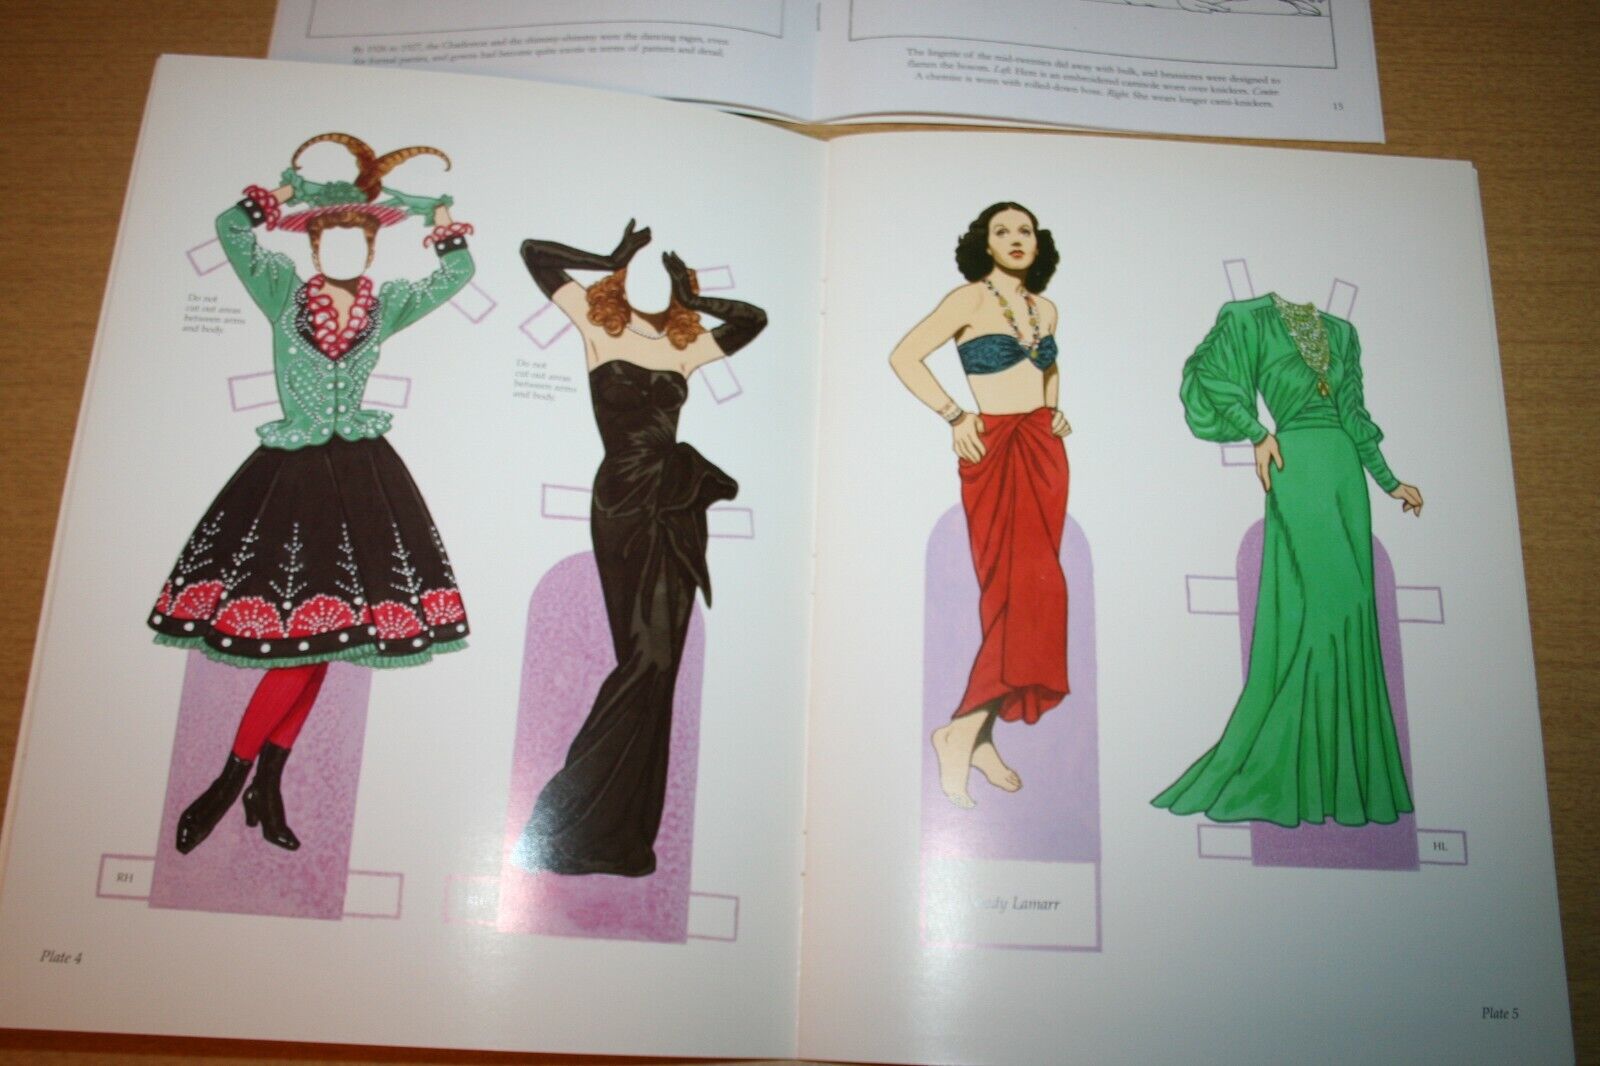 Tierney Paper Doll & Coloring Book Glamorous Stars & Fashions Roaring 20s #10 Tom Tierney - фотография #6